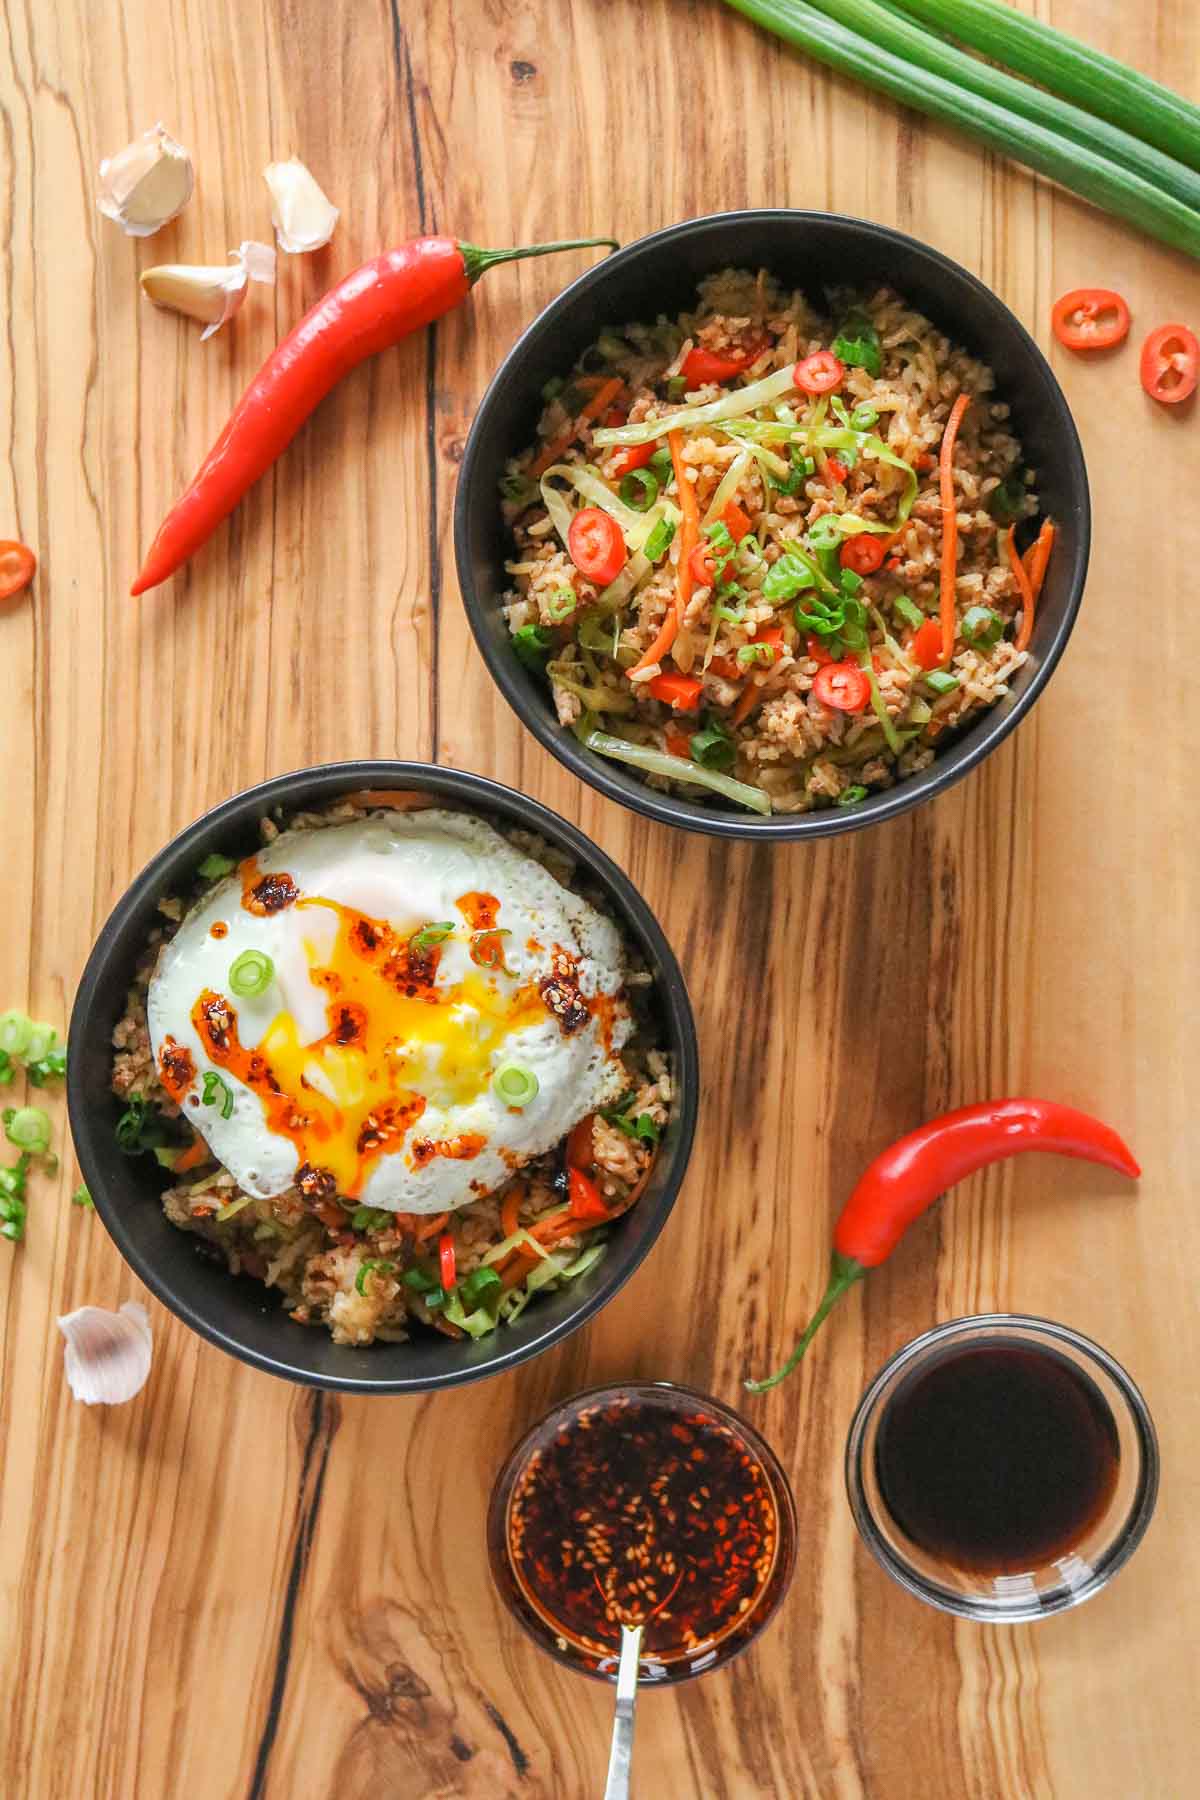 Two bowls of fried rice, one topped with an egg and one without.